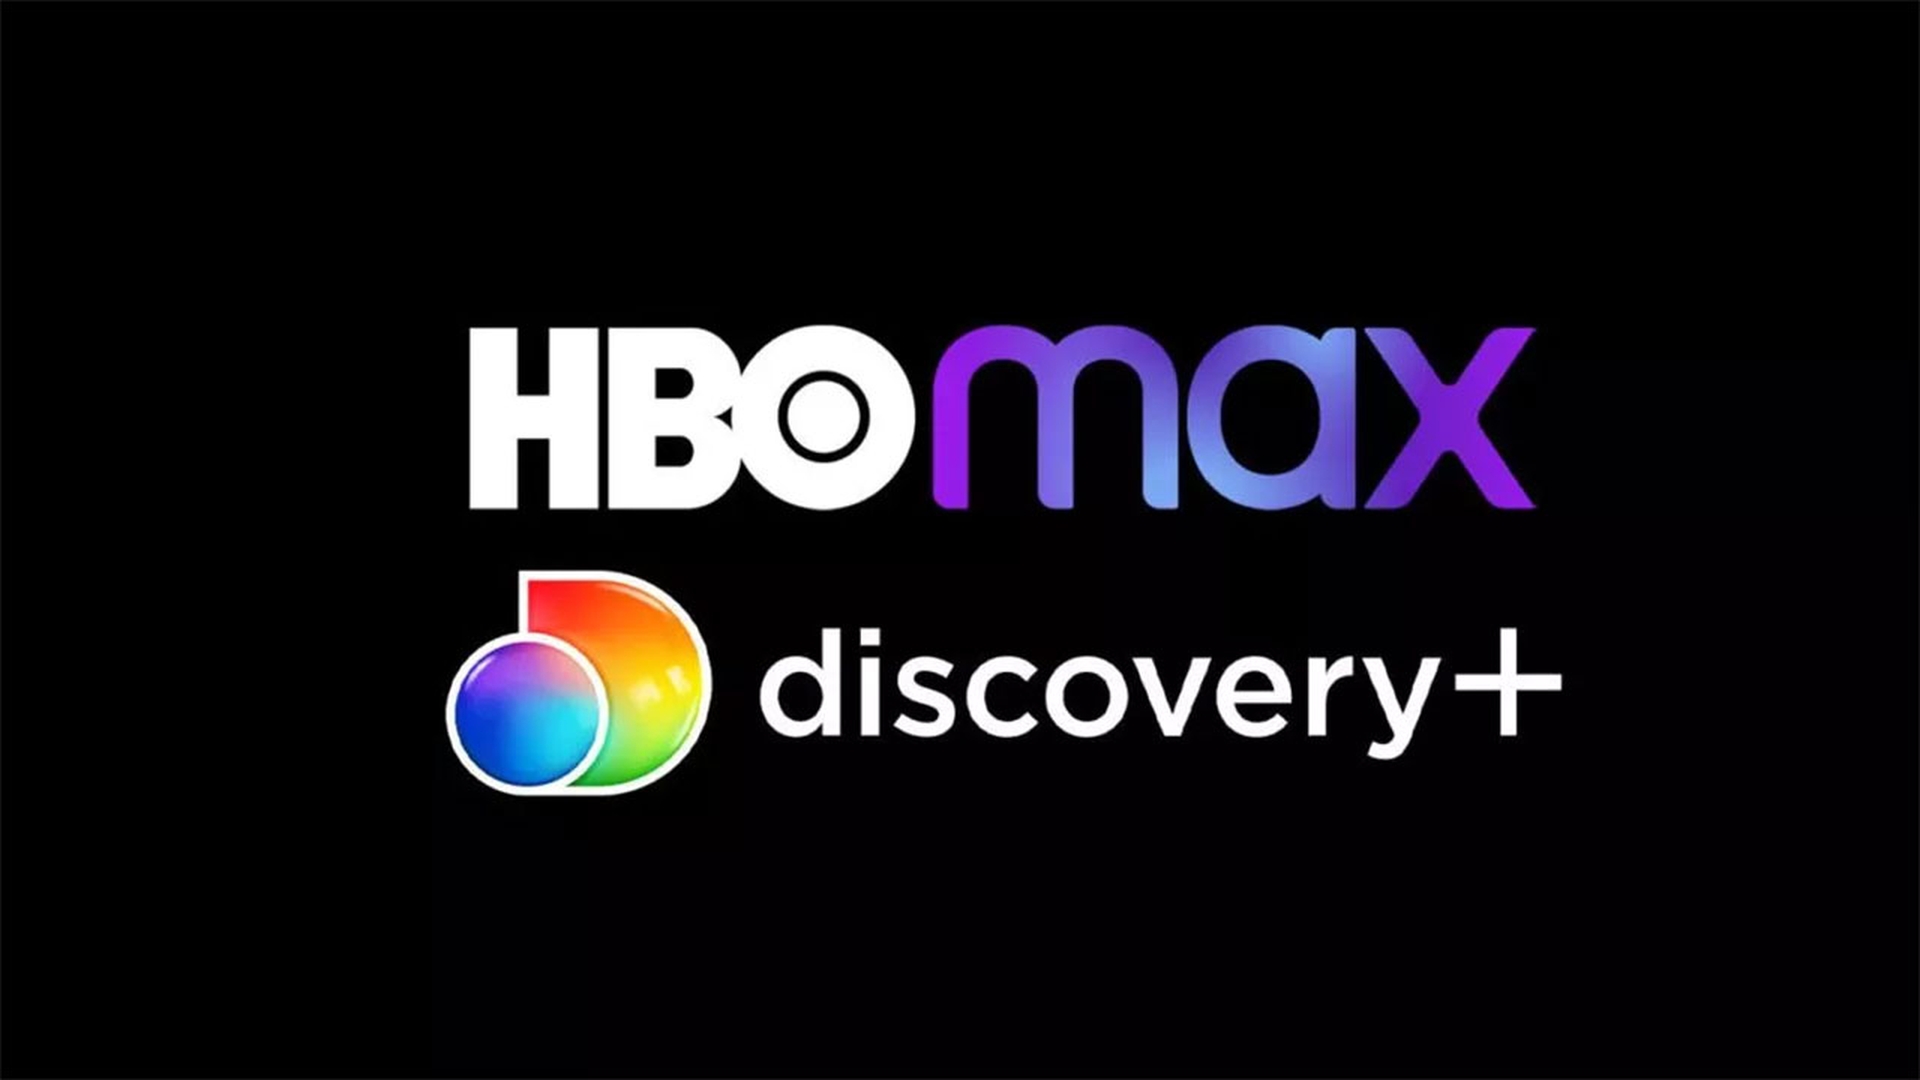 In this article, we are going to be covering what's going on with HBO Max, as HBO Max Discovery+ merging next year under a new name.